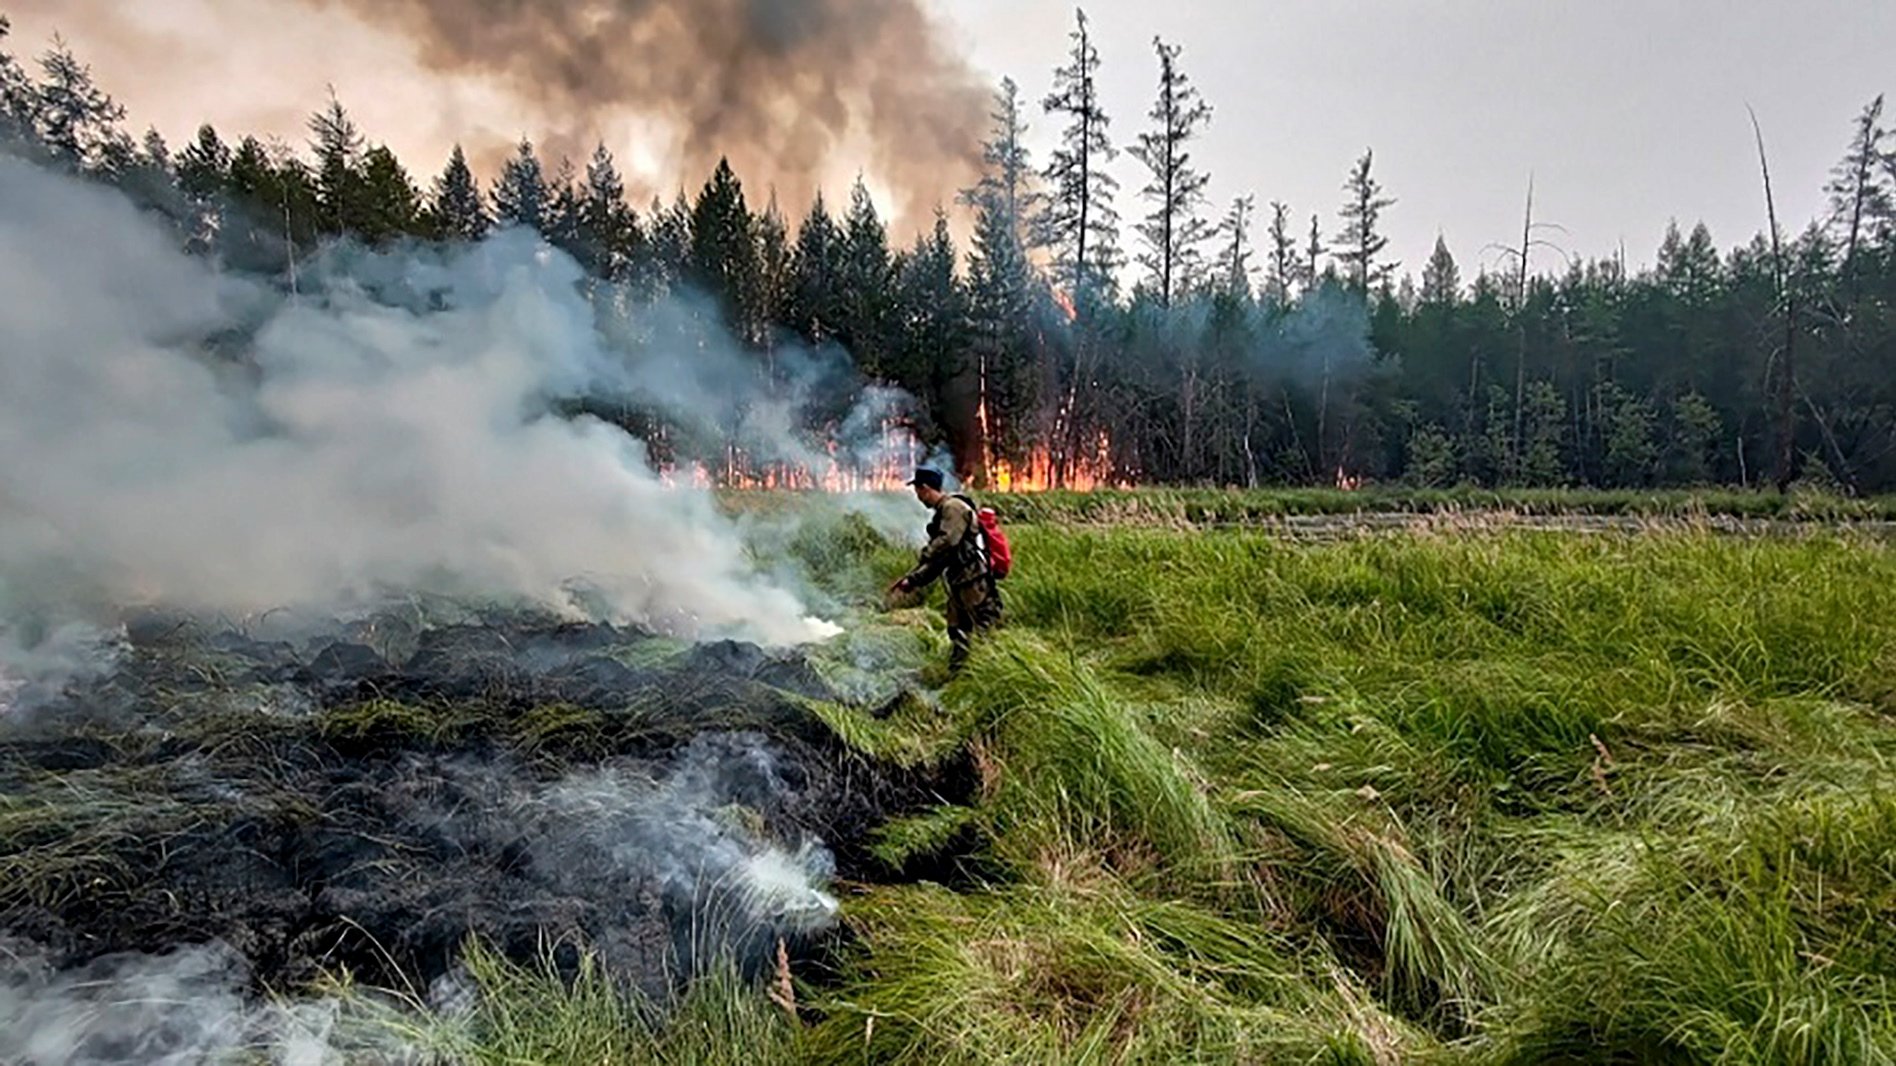 epa09392031 An undated handout photo made available by the Ministry of Nature Protection of Yakutia, shows a fire fighter extinguishing with the wildfire in the Republic of Sakha (Yakutia), Russia, issued 03 August 2021. According to the operational data of Russian Emergency ministry, 171 wildfires are active on the territory of the Republic of Sakha (Yakutia). 2423 people and 409 pieces of equipment were involved in extinguishing forest fires in Yakutia.  EPA/MINISTRY OF NATURE PROTECTION OF YAKUTIA HANDOUT  HANDOUT EDITORIAL USE ONLY/NO SALES